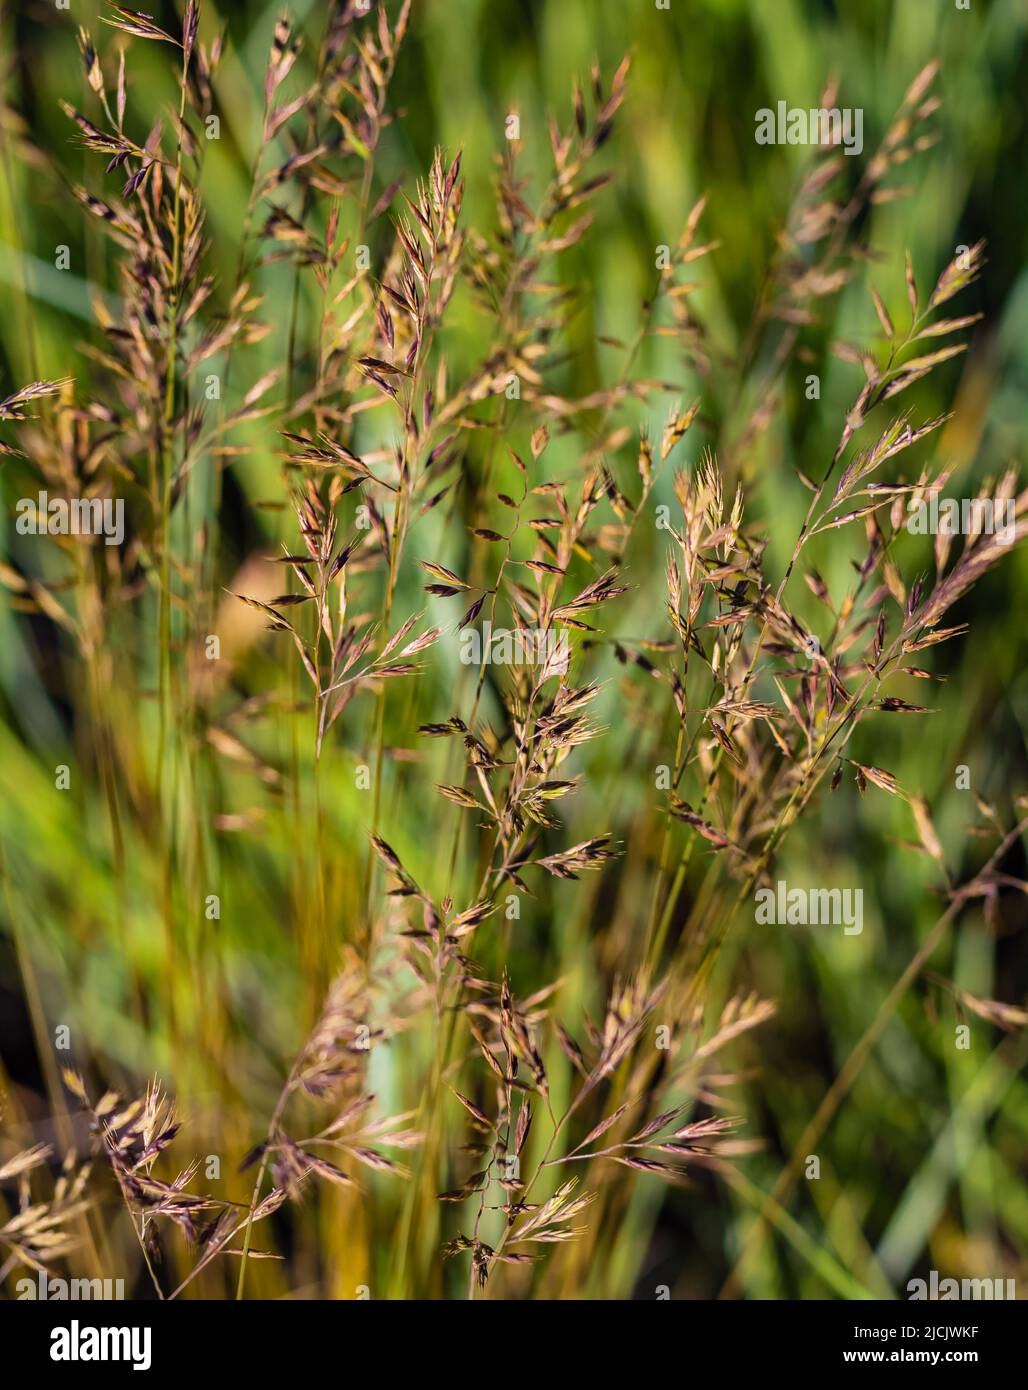 Wild green grass in shallow depth of field background. Weeds in natural background in morning light. Blurred photo, nobody, selective focus Stock Photo